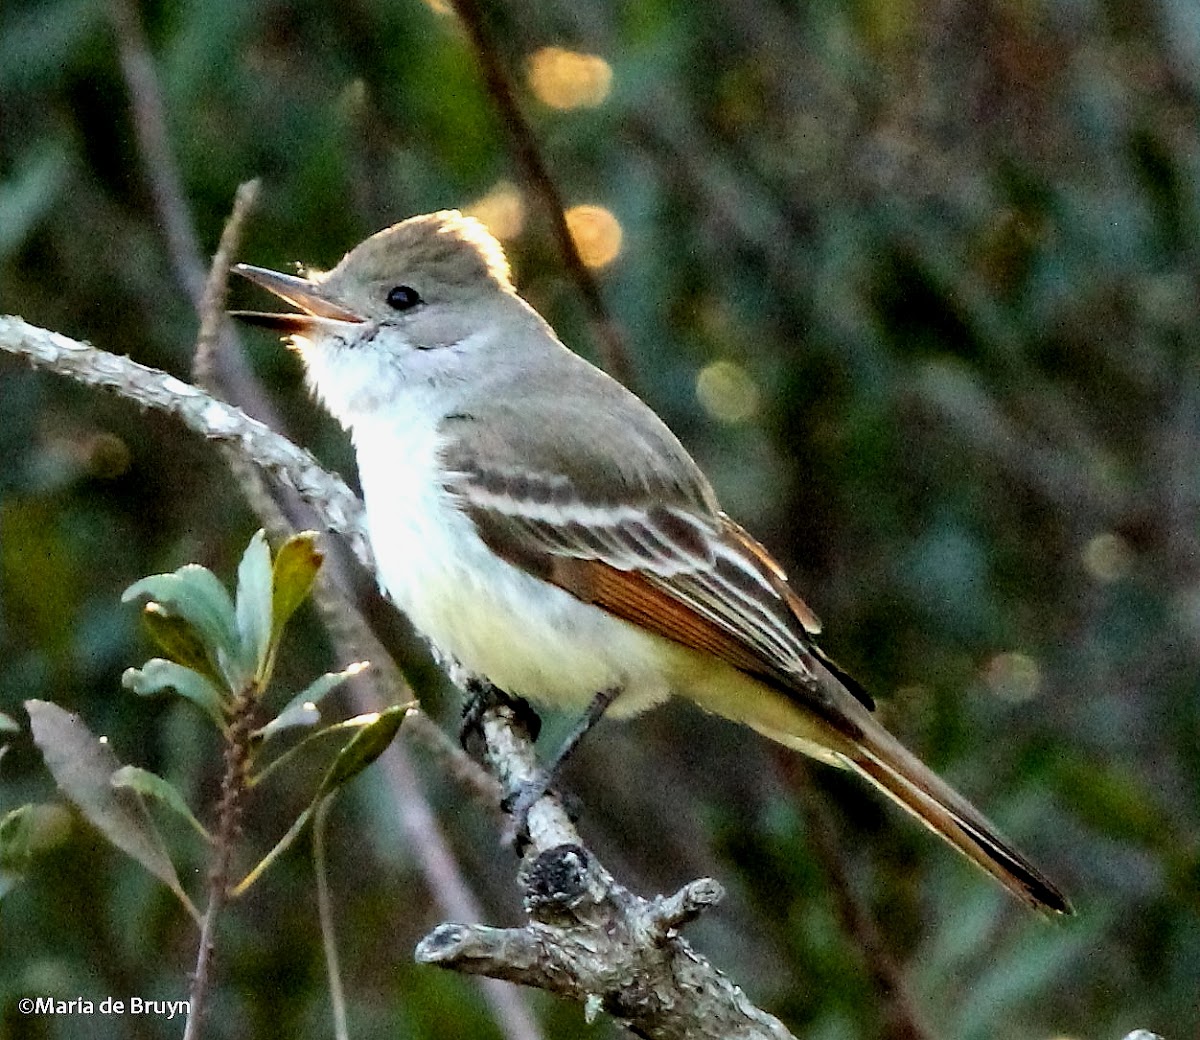 Ash-throated flycatcher